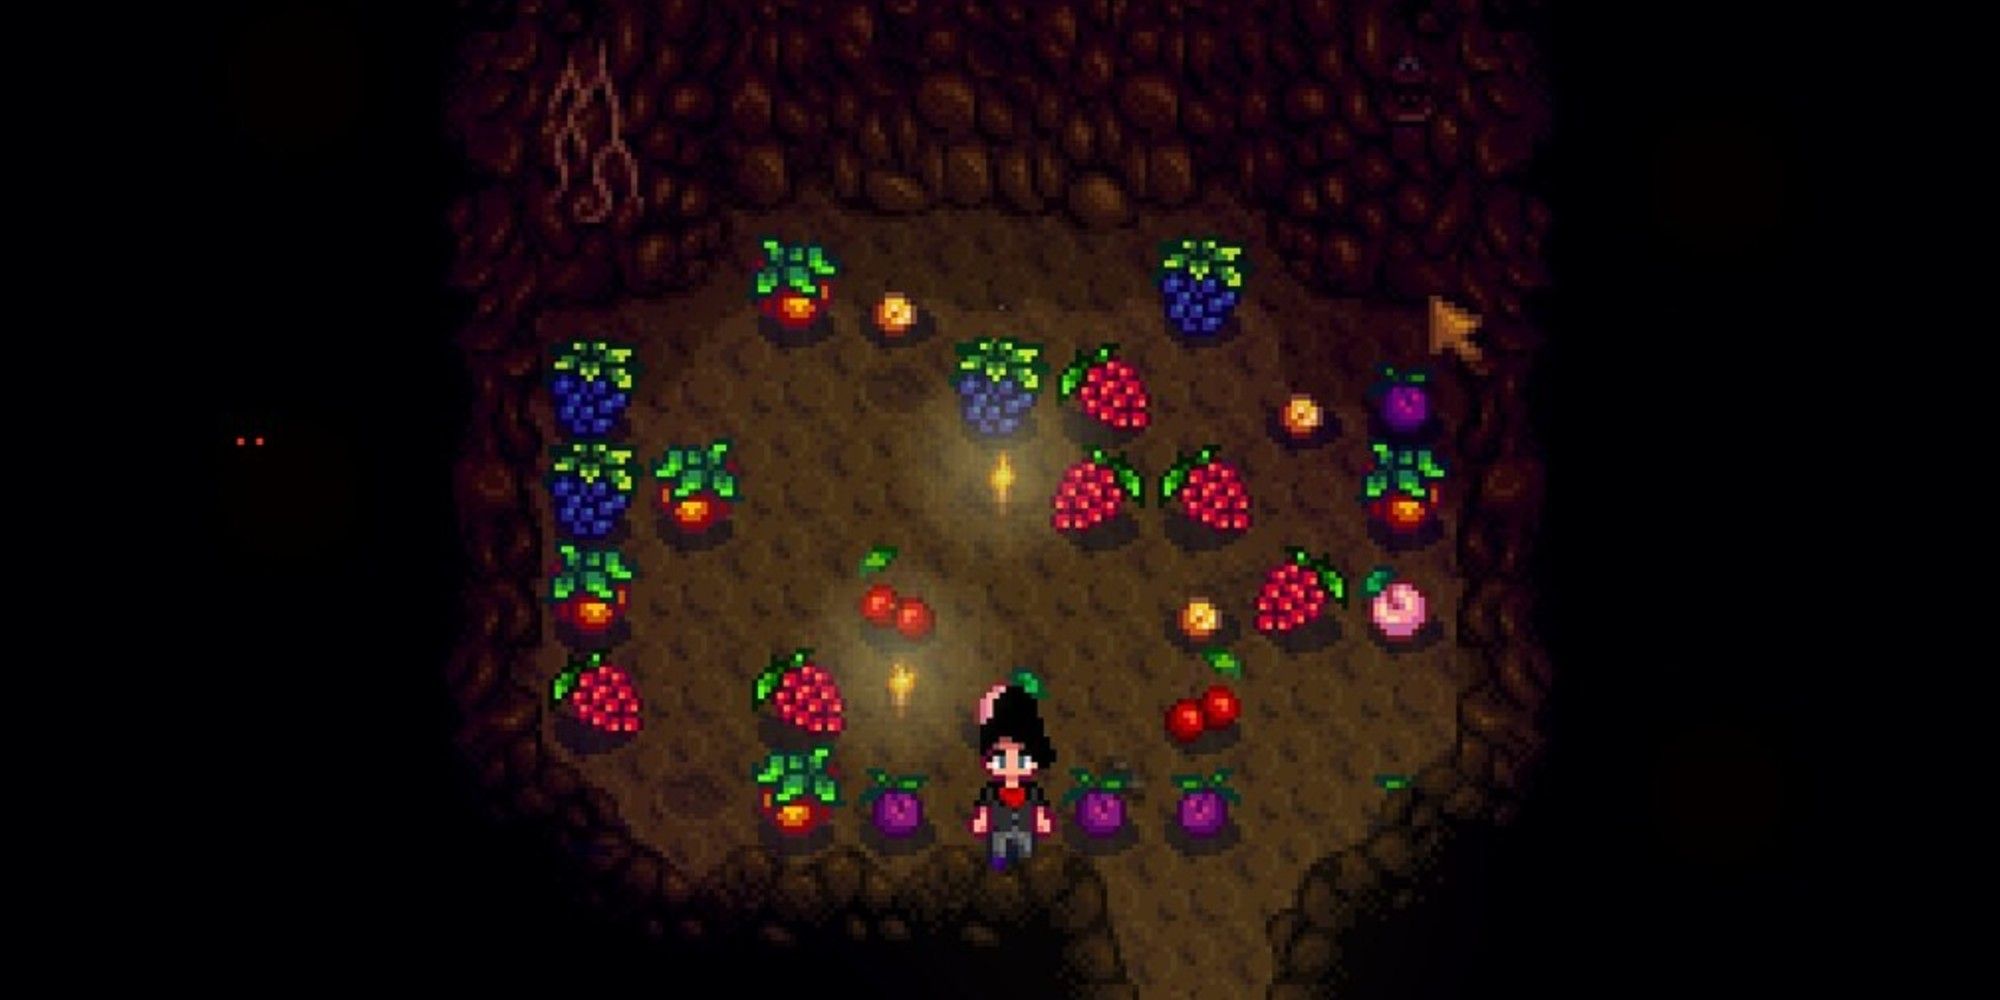 farm cave with player standing among fruits